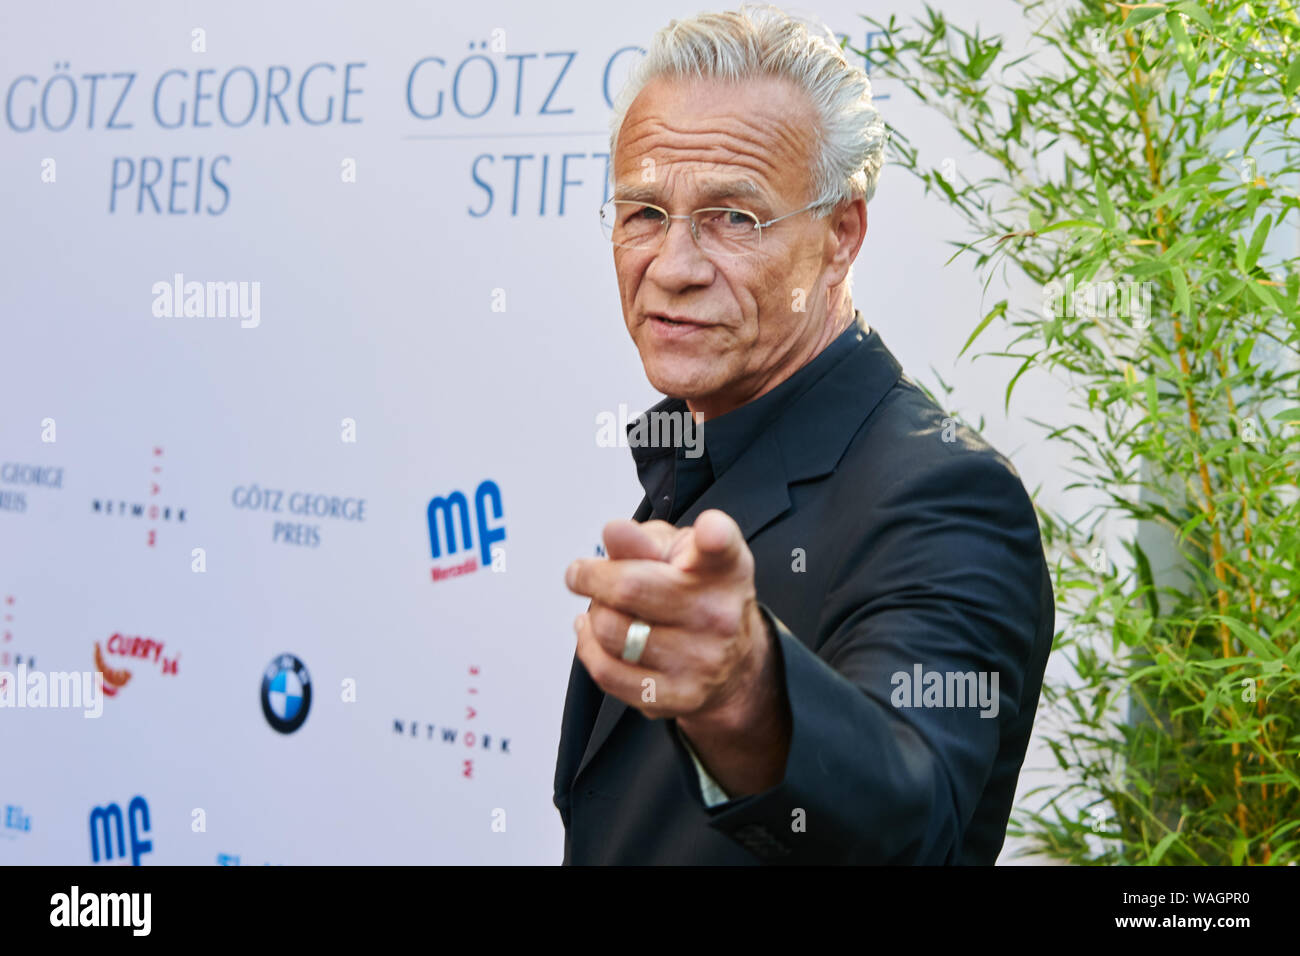 Berlin, Germany. 19th Aug, 2019. Actor Klaus J. Behrendt comes to the awarding of the Götz George Prize. The Götz George Prize was founded at the request of the actor who died in 2016. Credit: Annette Riedl//dpa/Alamy Live News Stock Photo